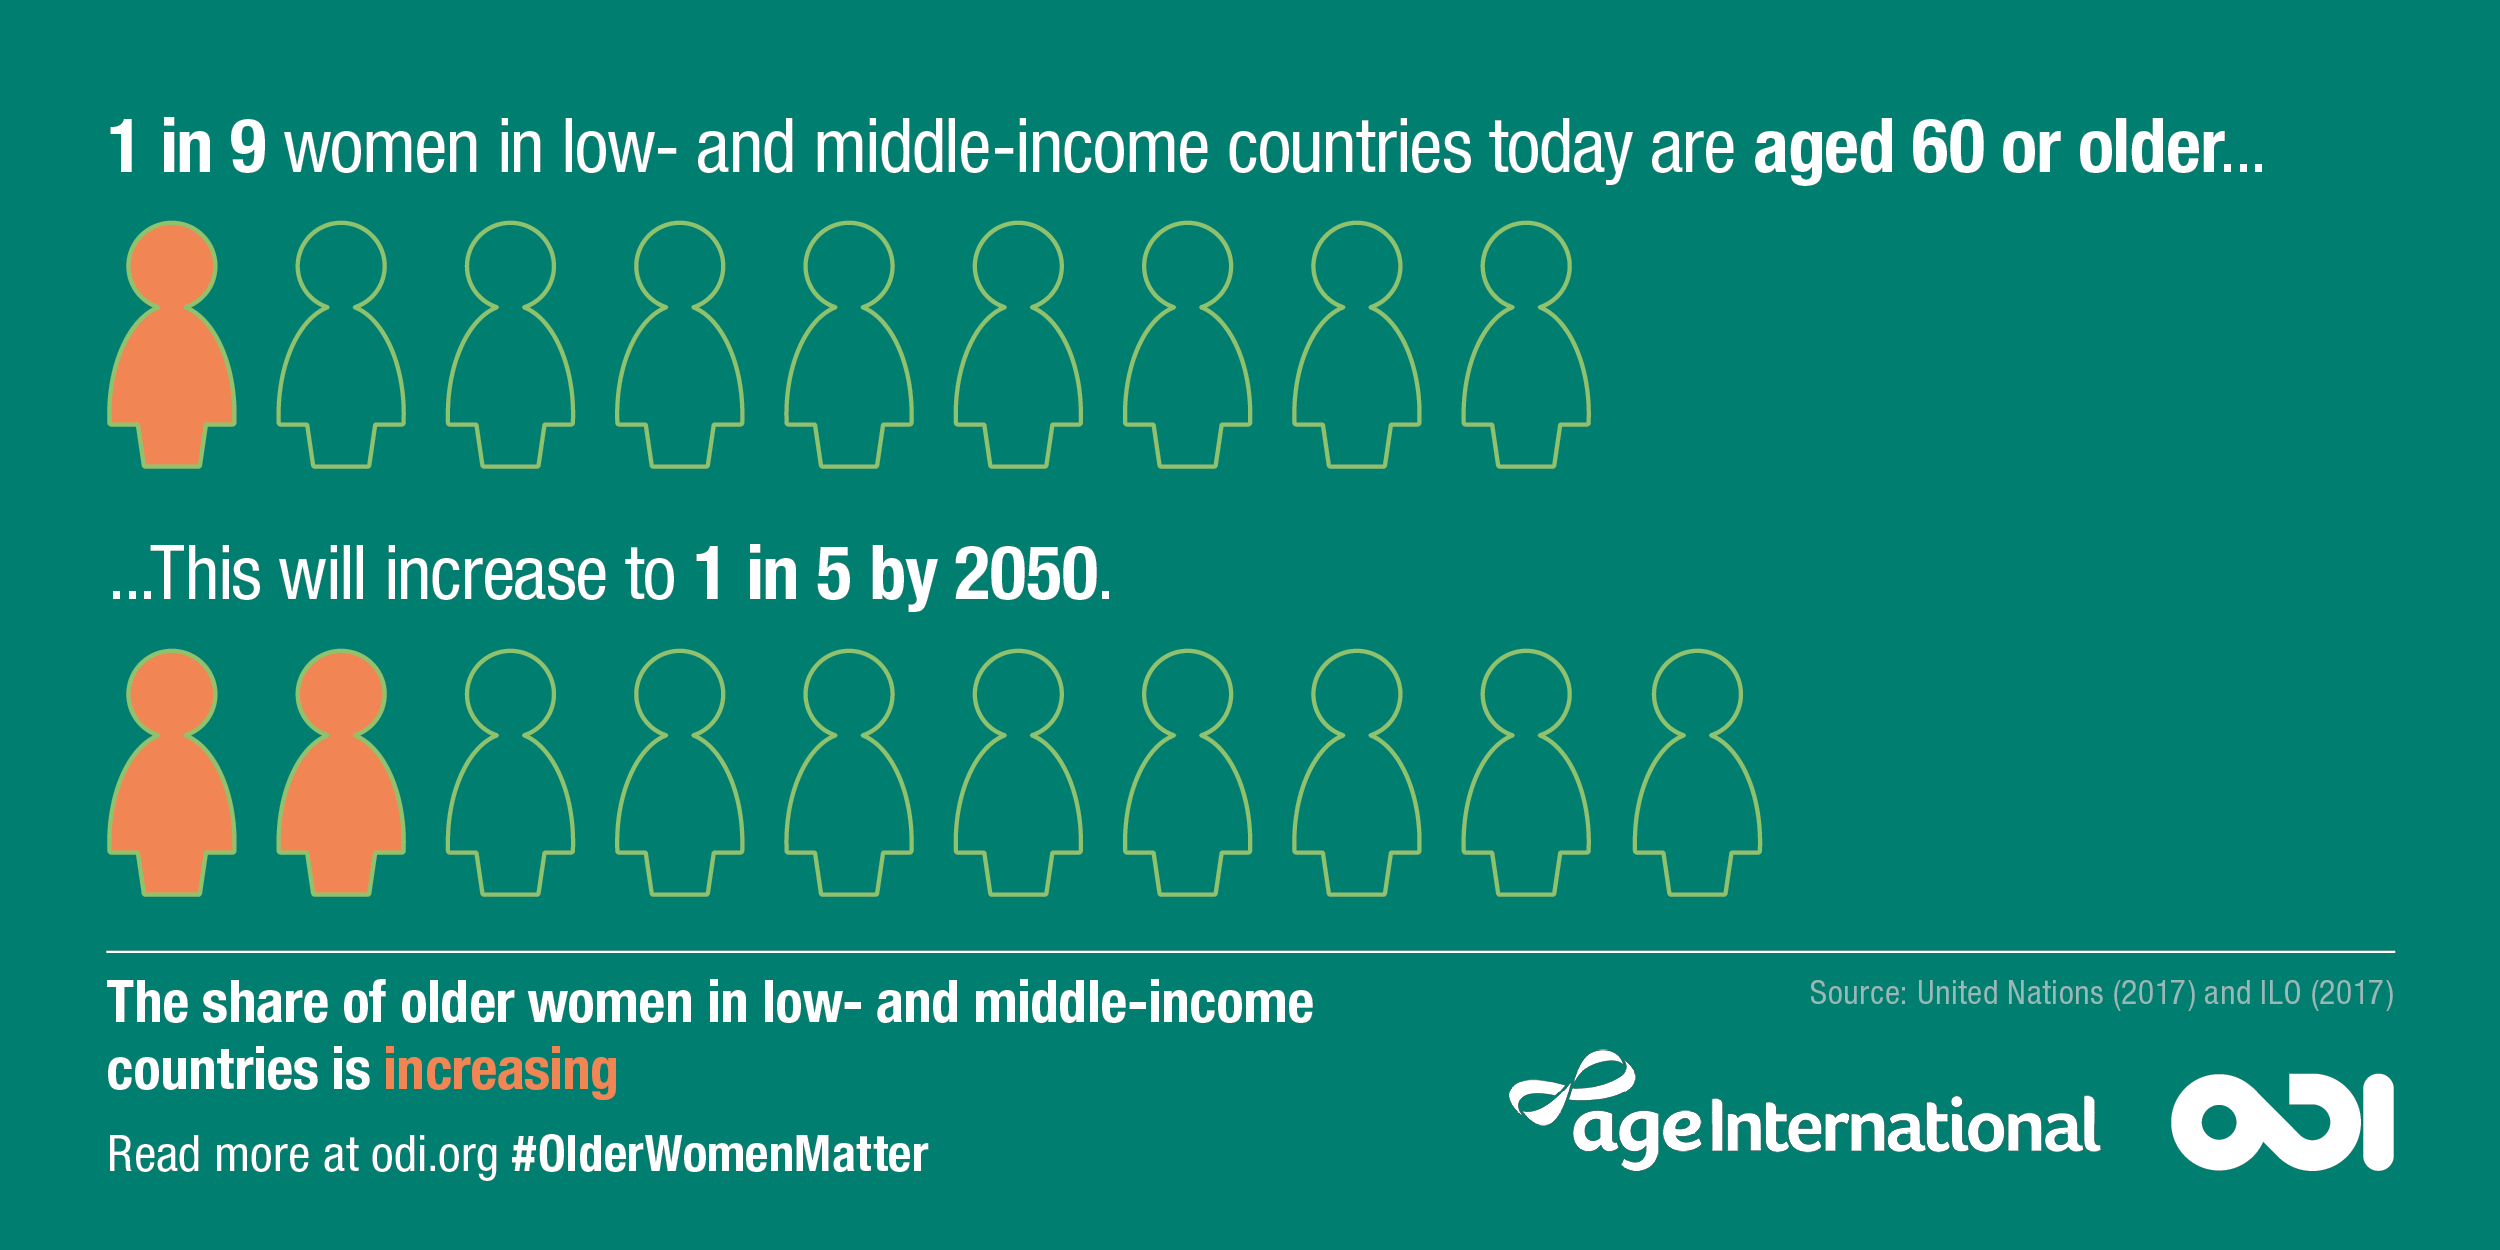 Infographic: the share of older women in low- and middle-income countries is increasing